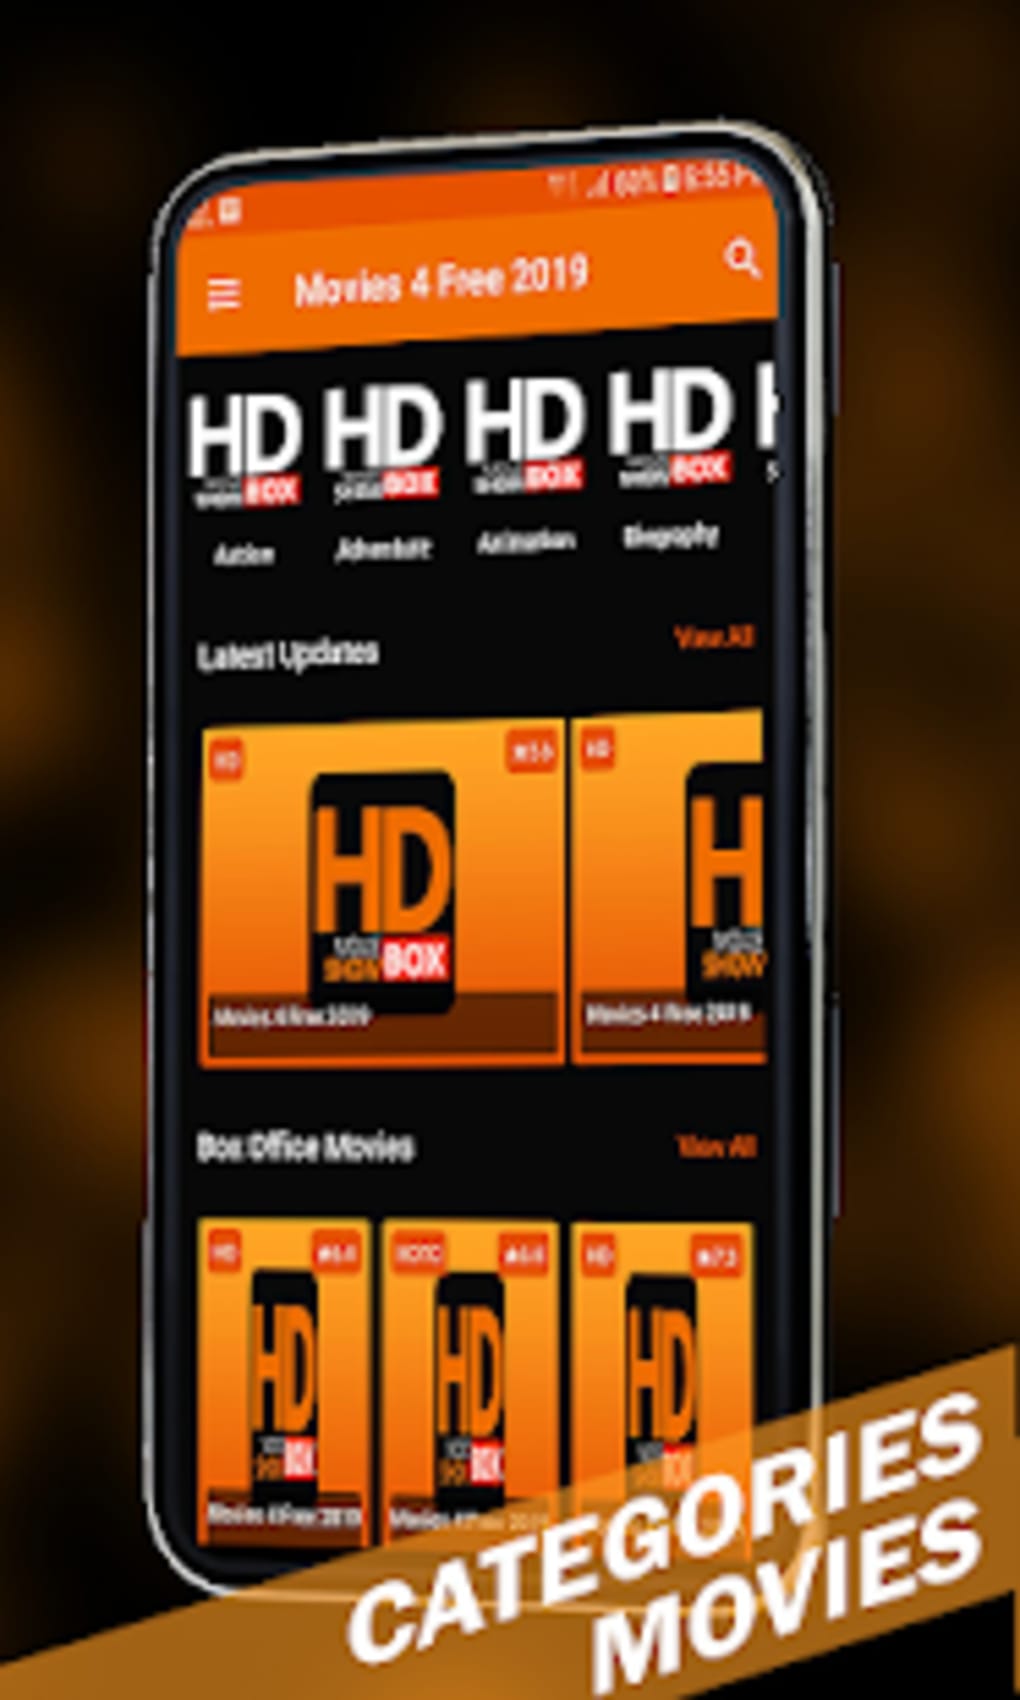 Movies 4 Free 2019 - HD Movies Free Online for Android - Download